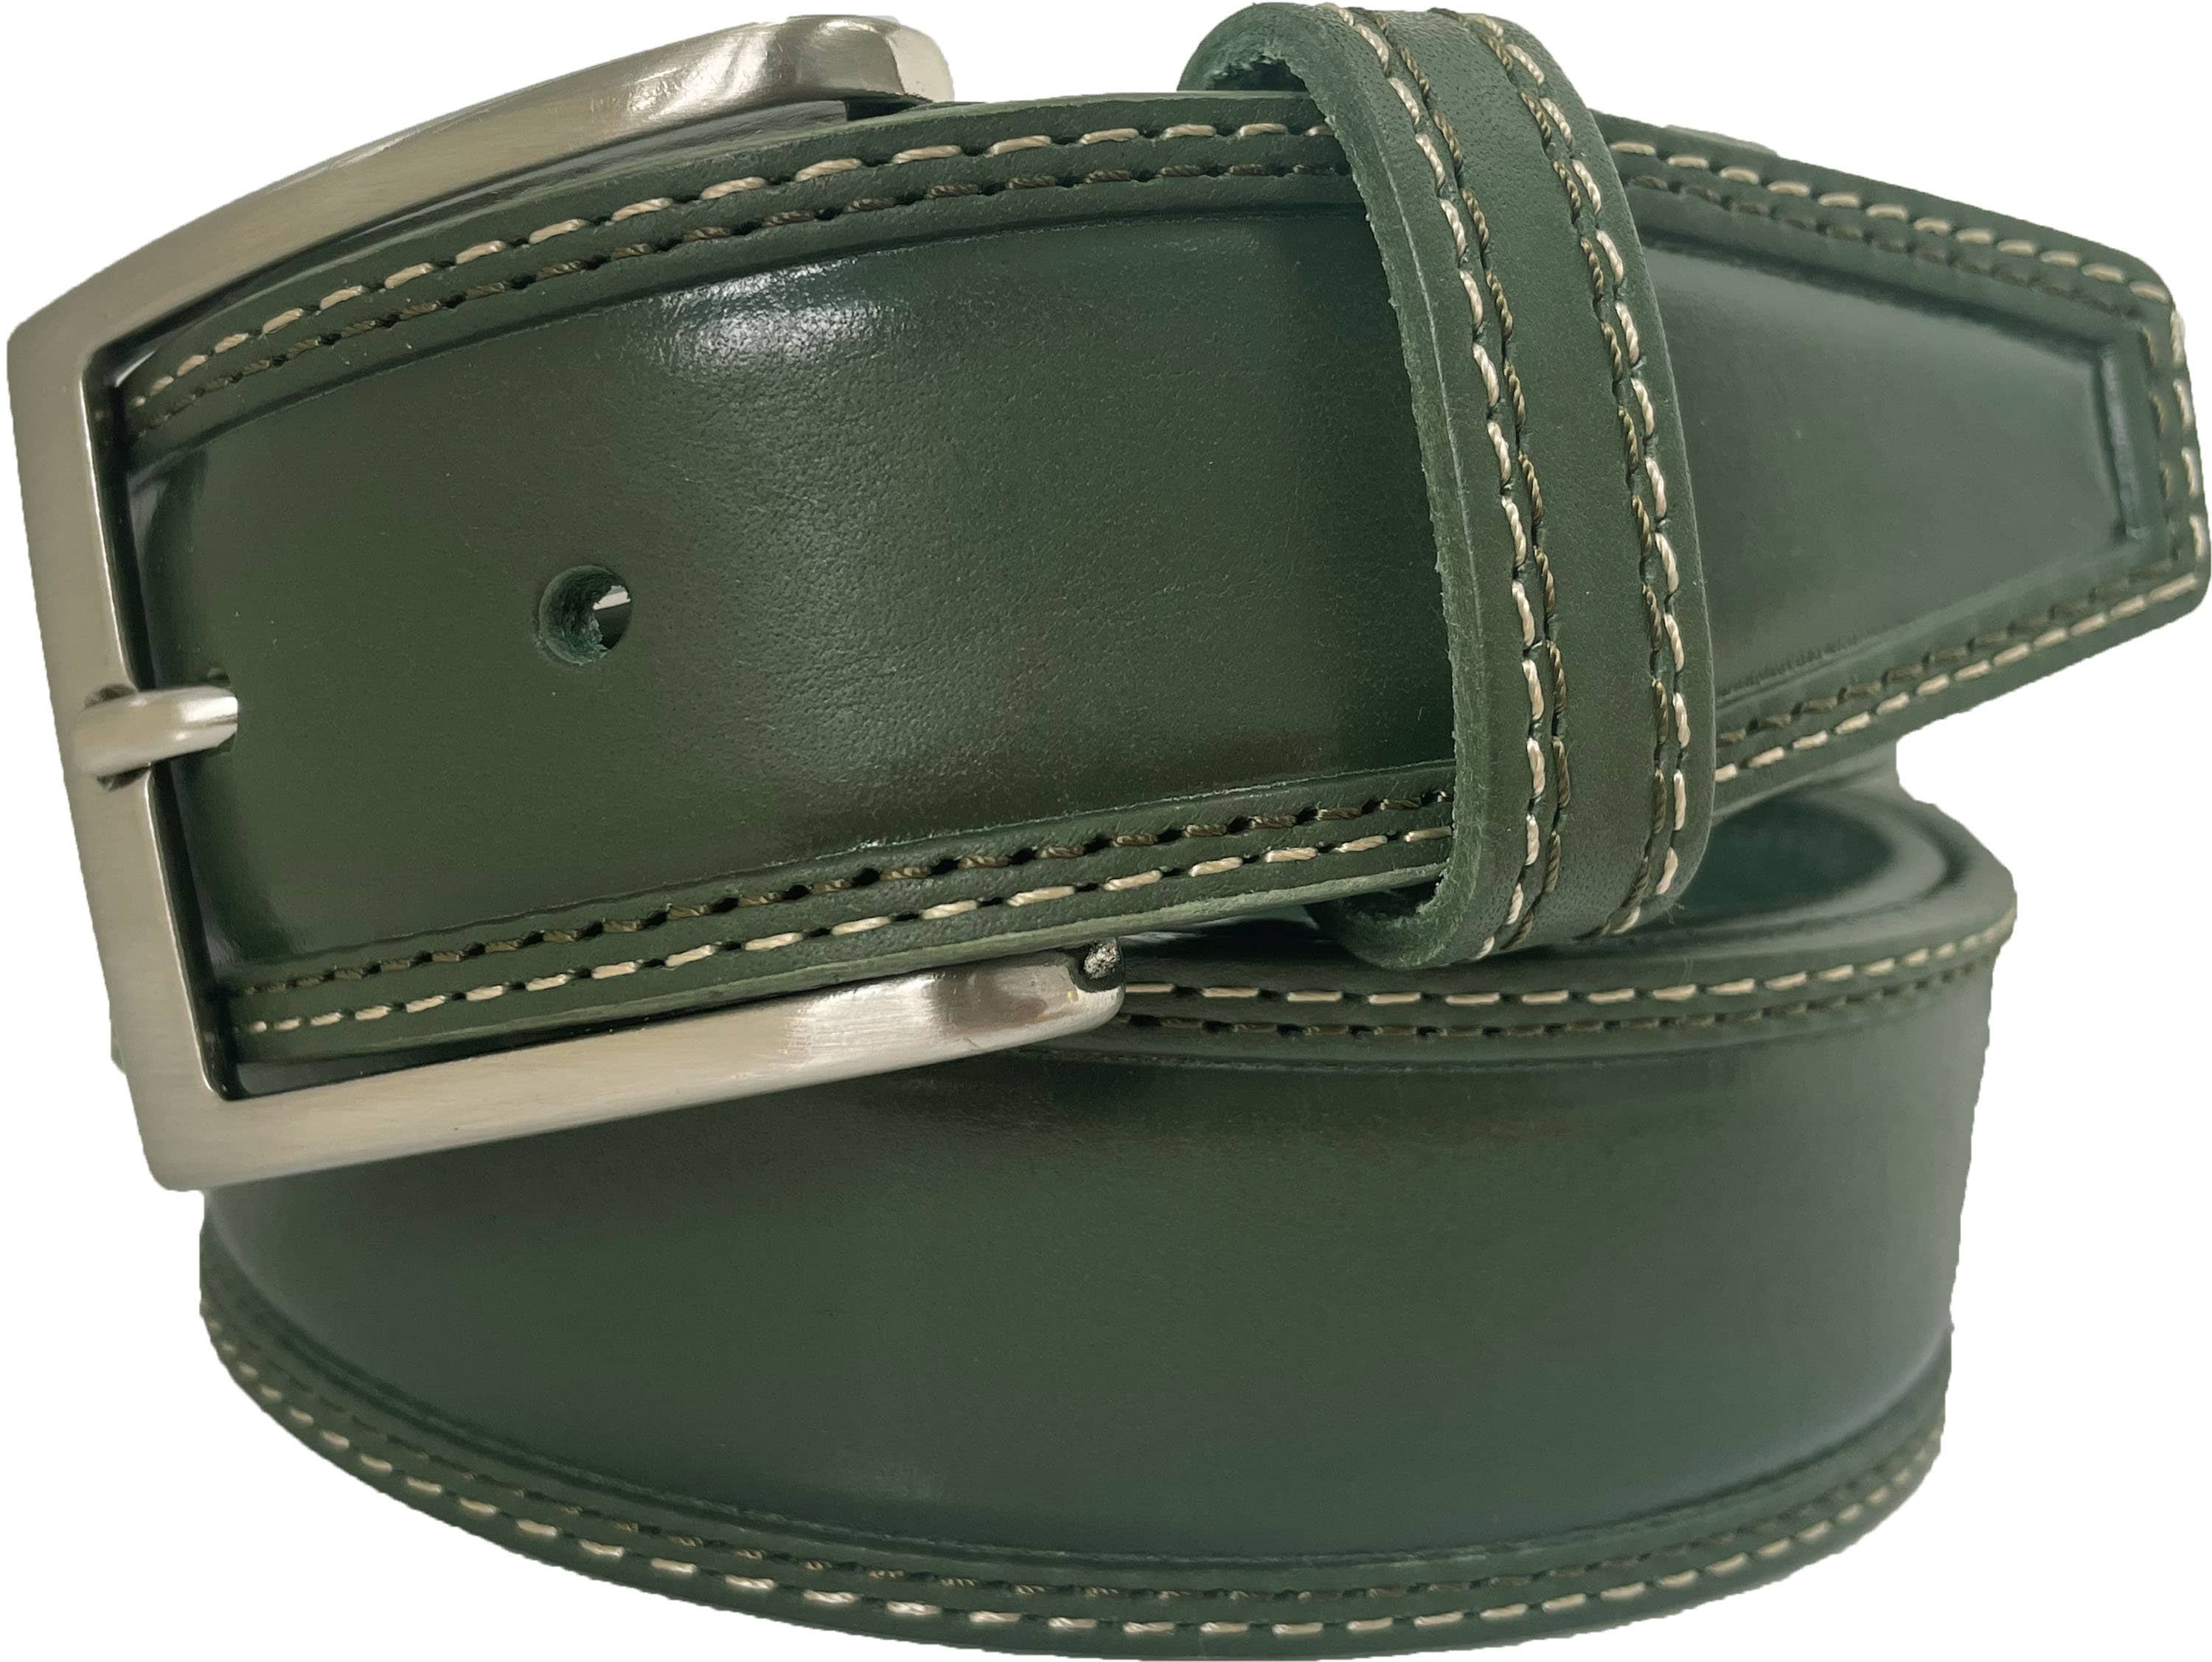 Leather belt, Western Stitched-Suede-lined, Thick, vegetable-tanned leather  belt, Can be a concealed carry belt or gun belt